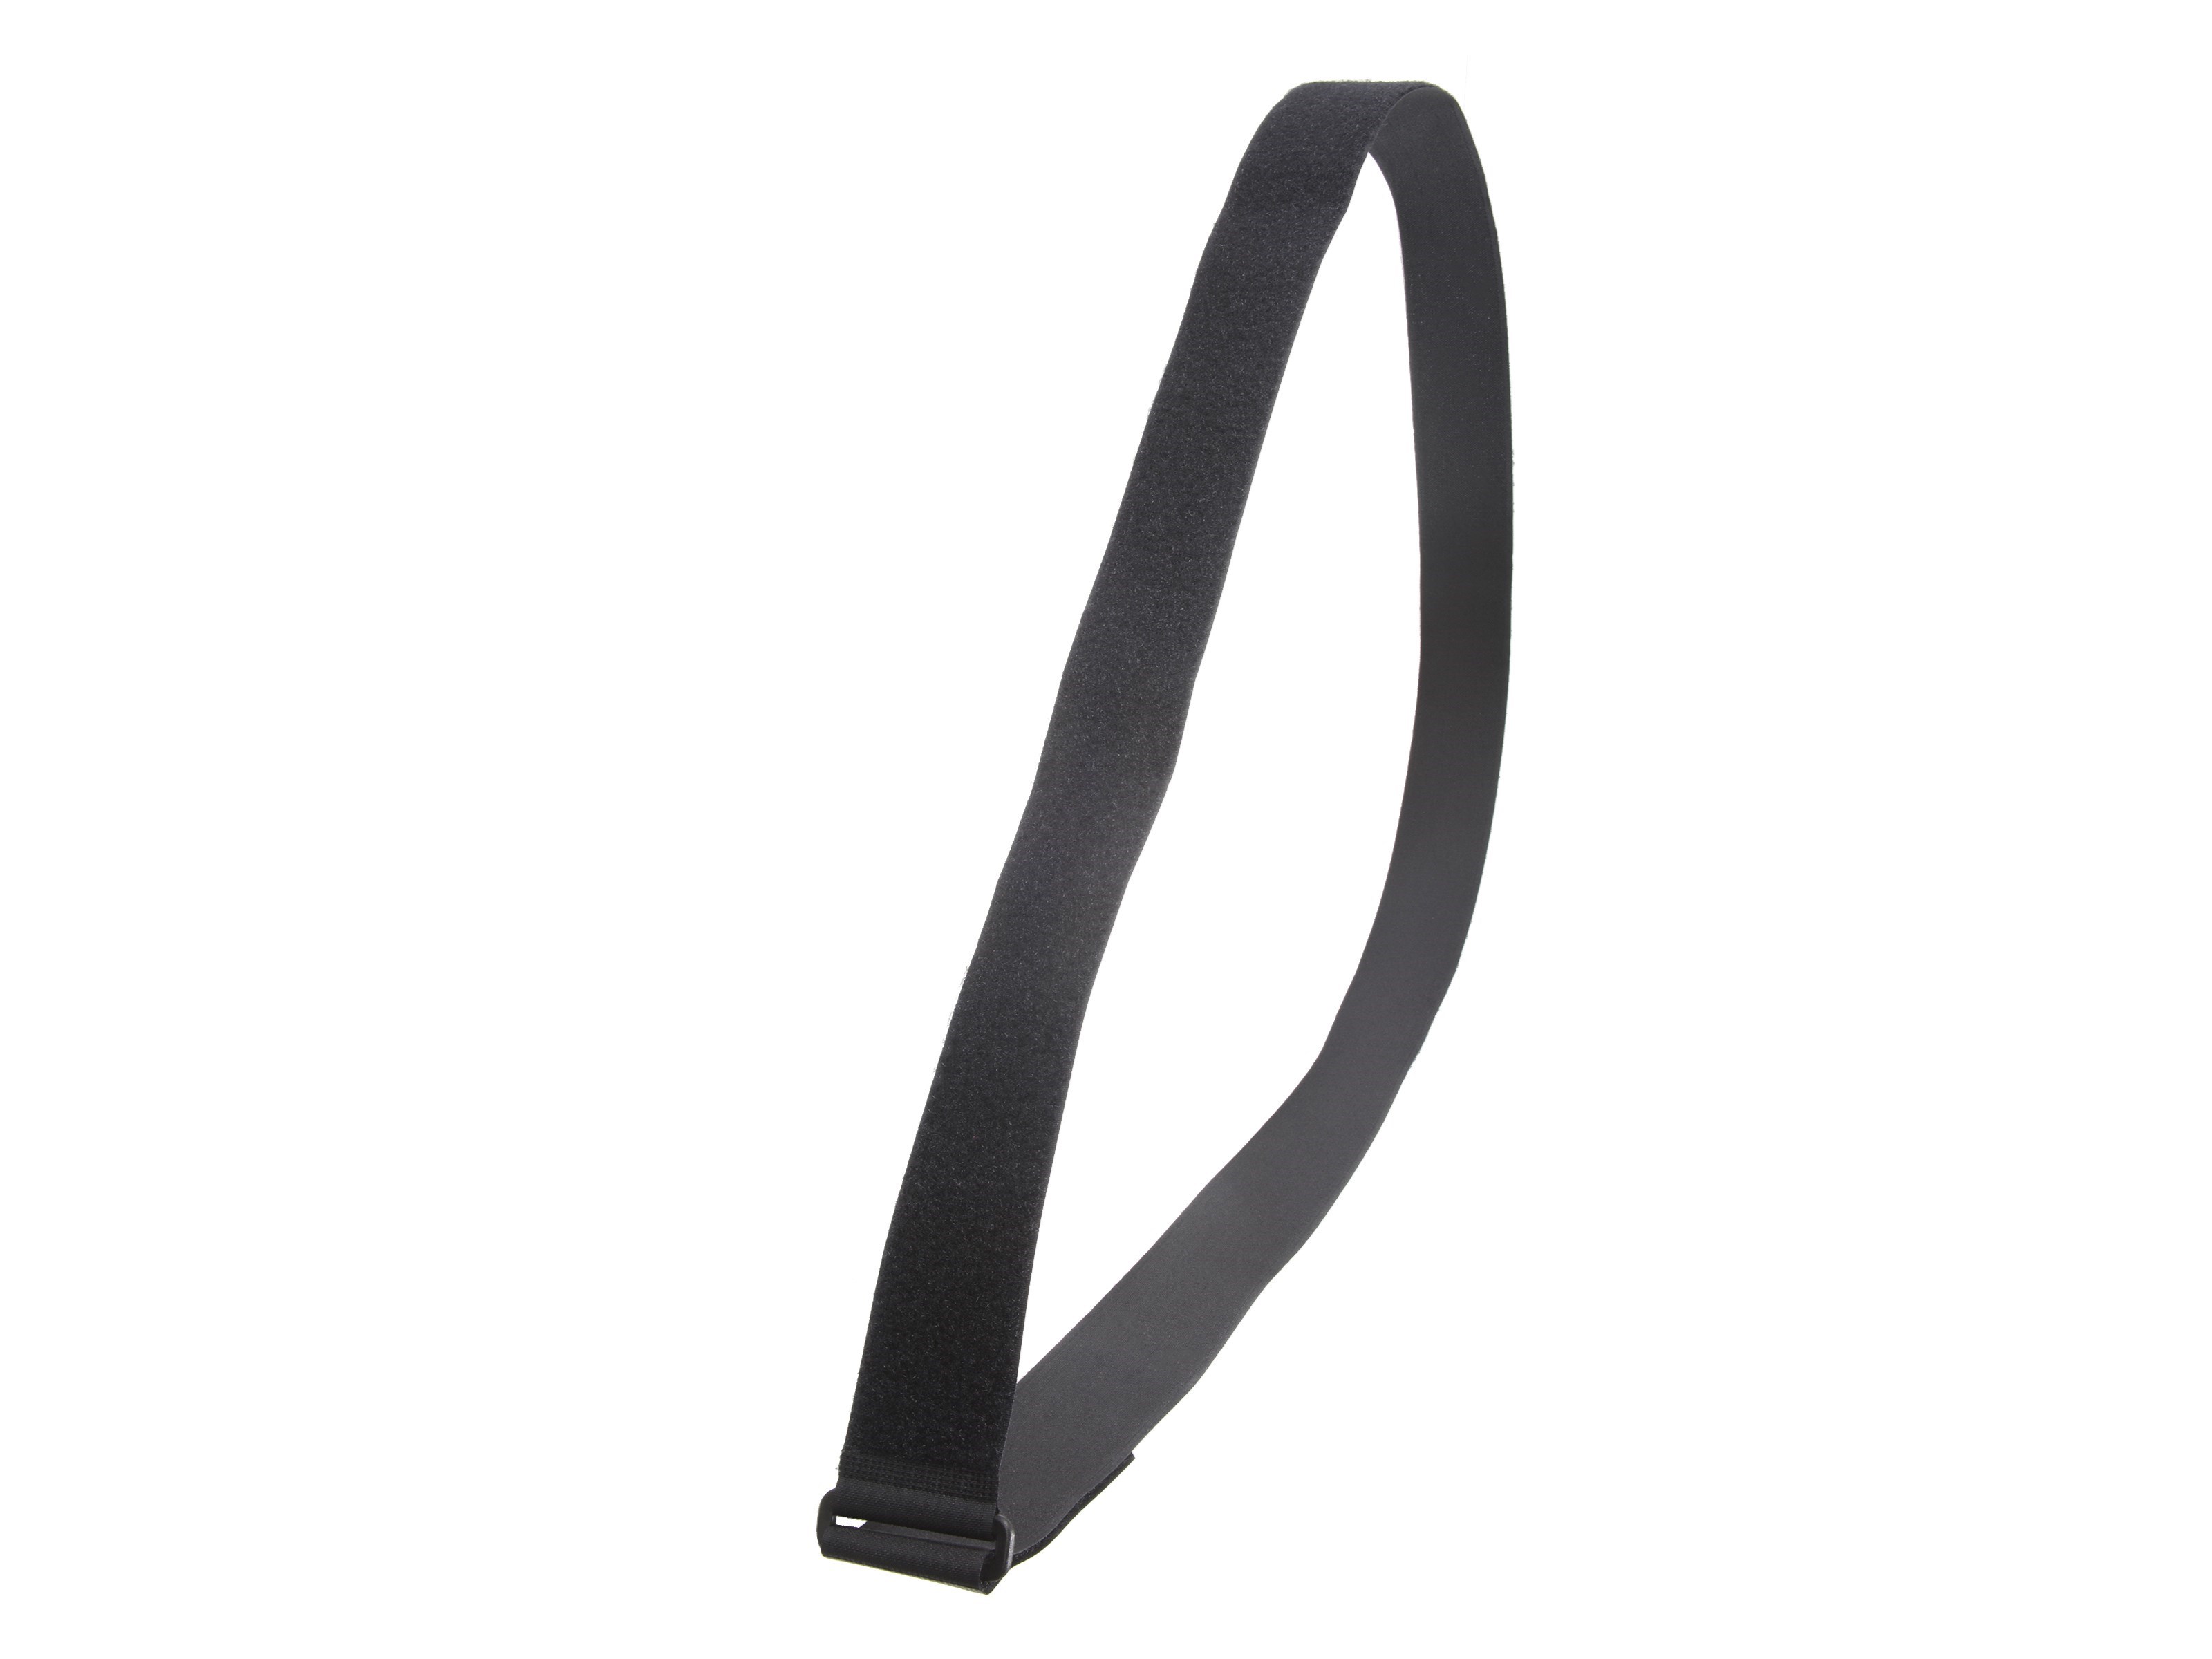 24 X 3 Inch Heavy-Duty Black Cinch Strap - 5 Pack - Secure™ Cable Ties